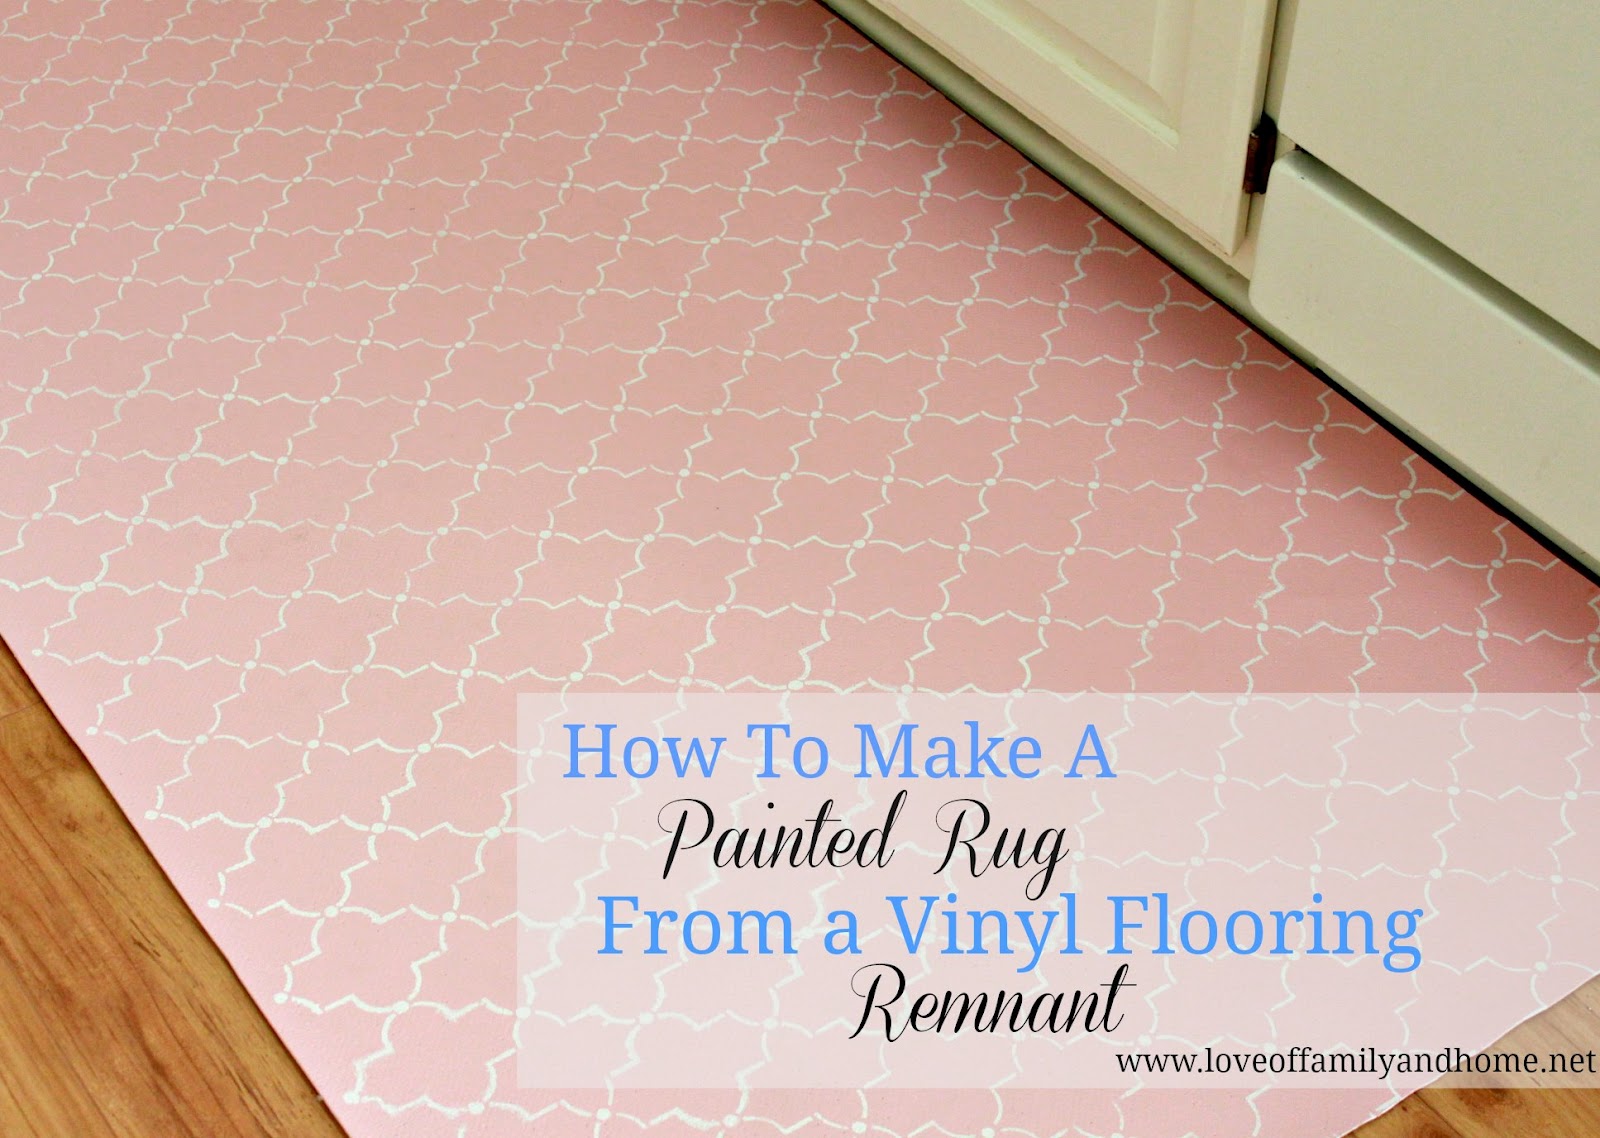 How To Paint A Rug Using Vinyl Flooring, How To Make A Floor Cloth From Vinyl